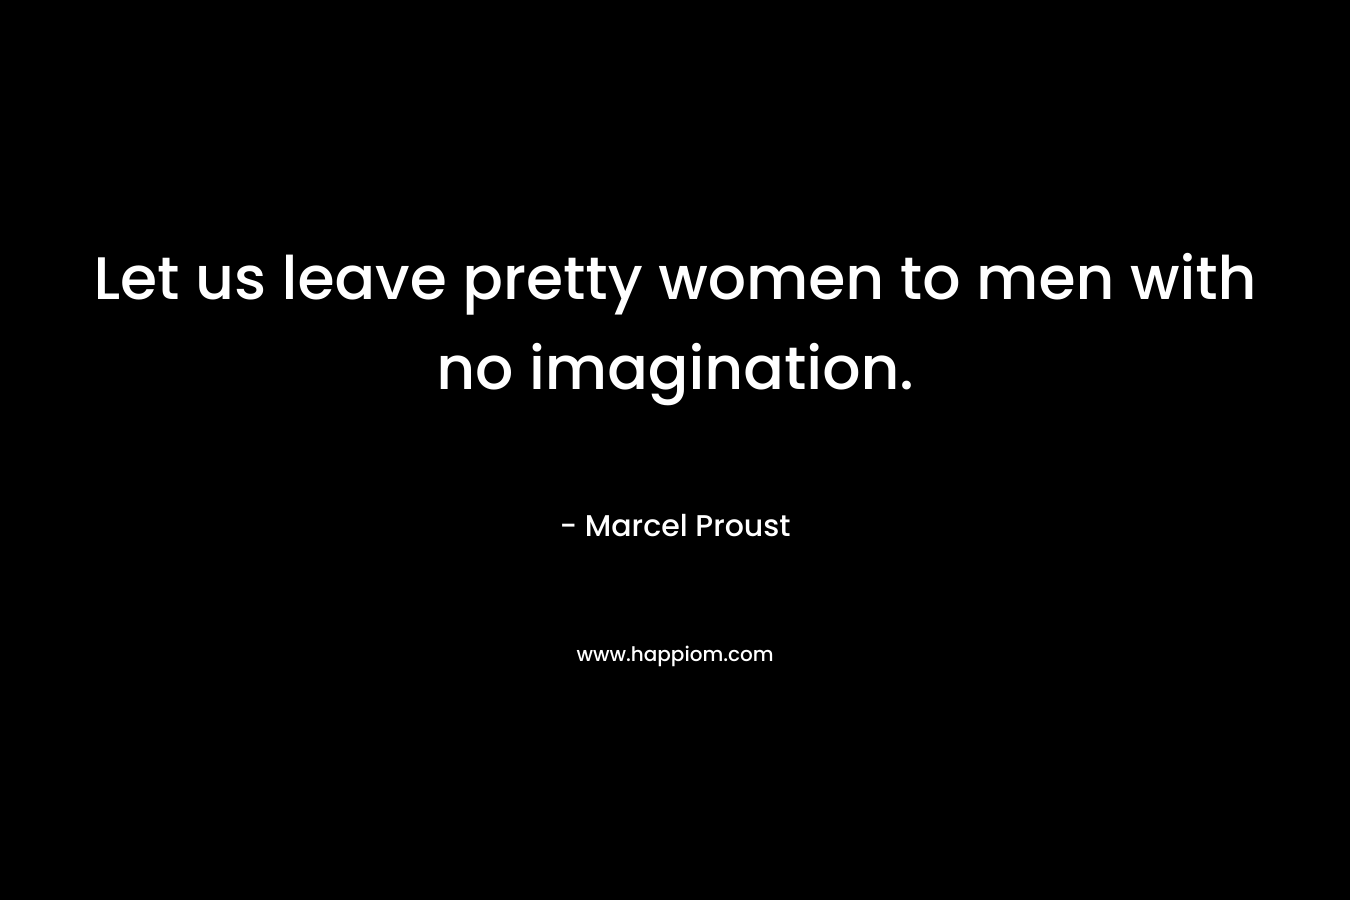 Let us leave pretty women to men with no imagination.